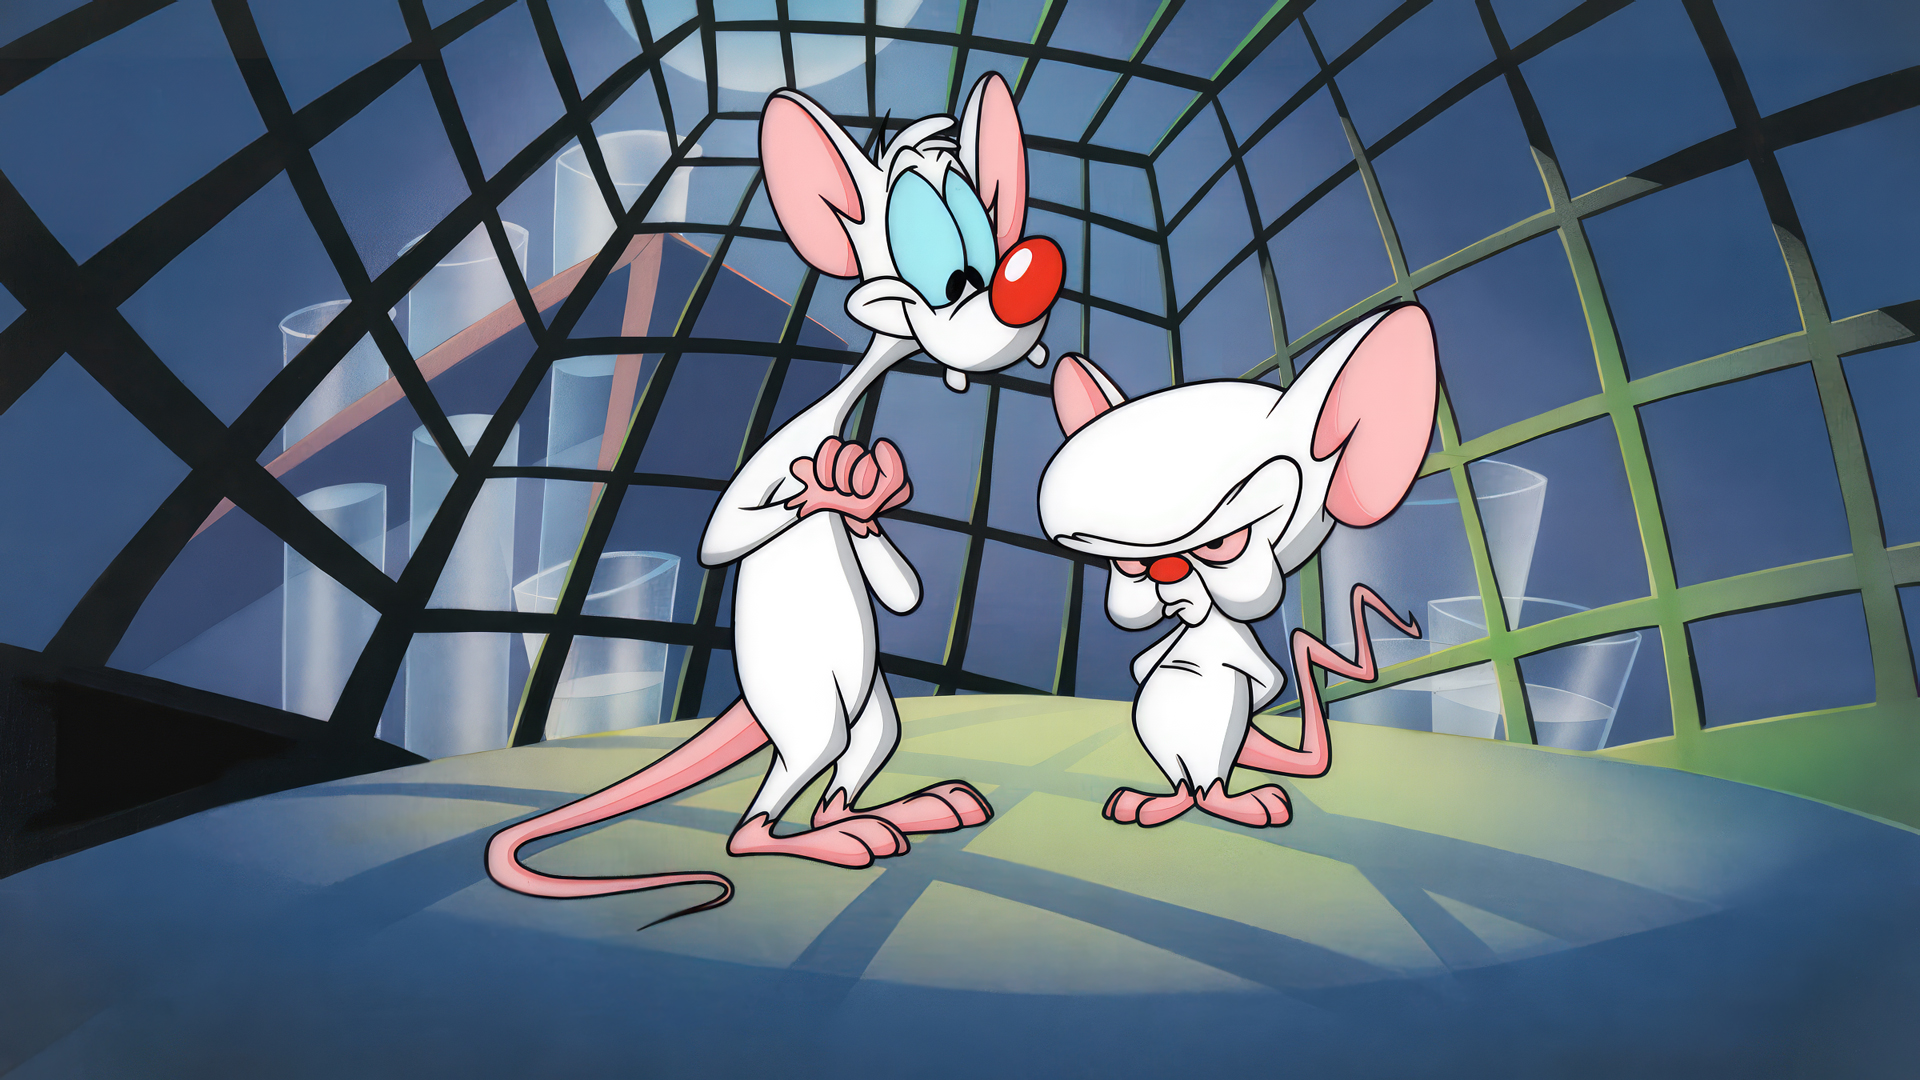 General 1920x1080 Pinky and the Brain animation animated series cartoon mice laboratories cages Warner Brothers production cel